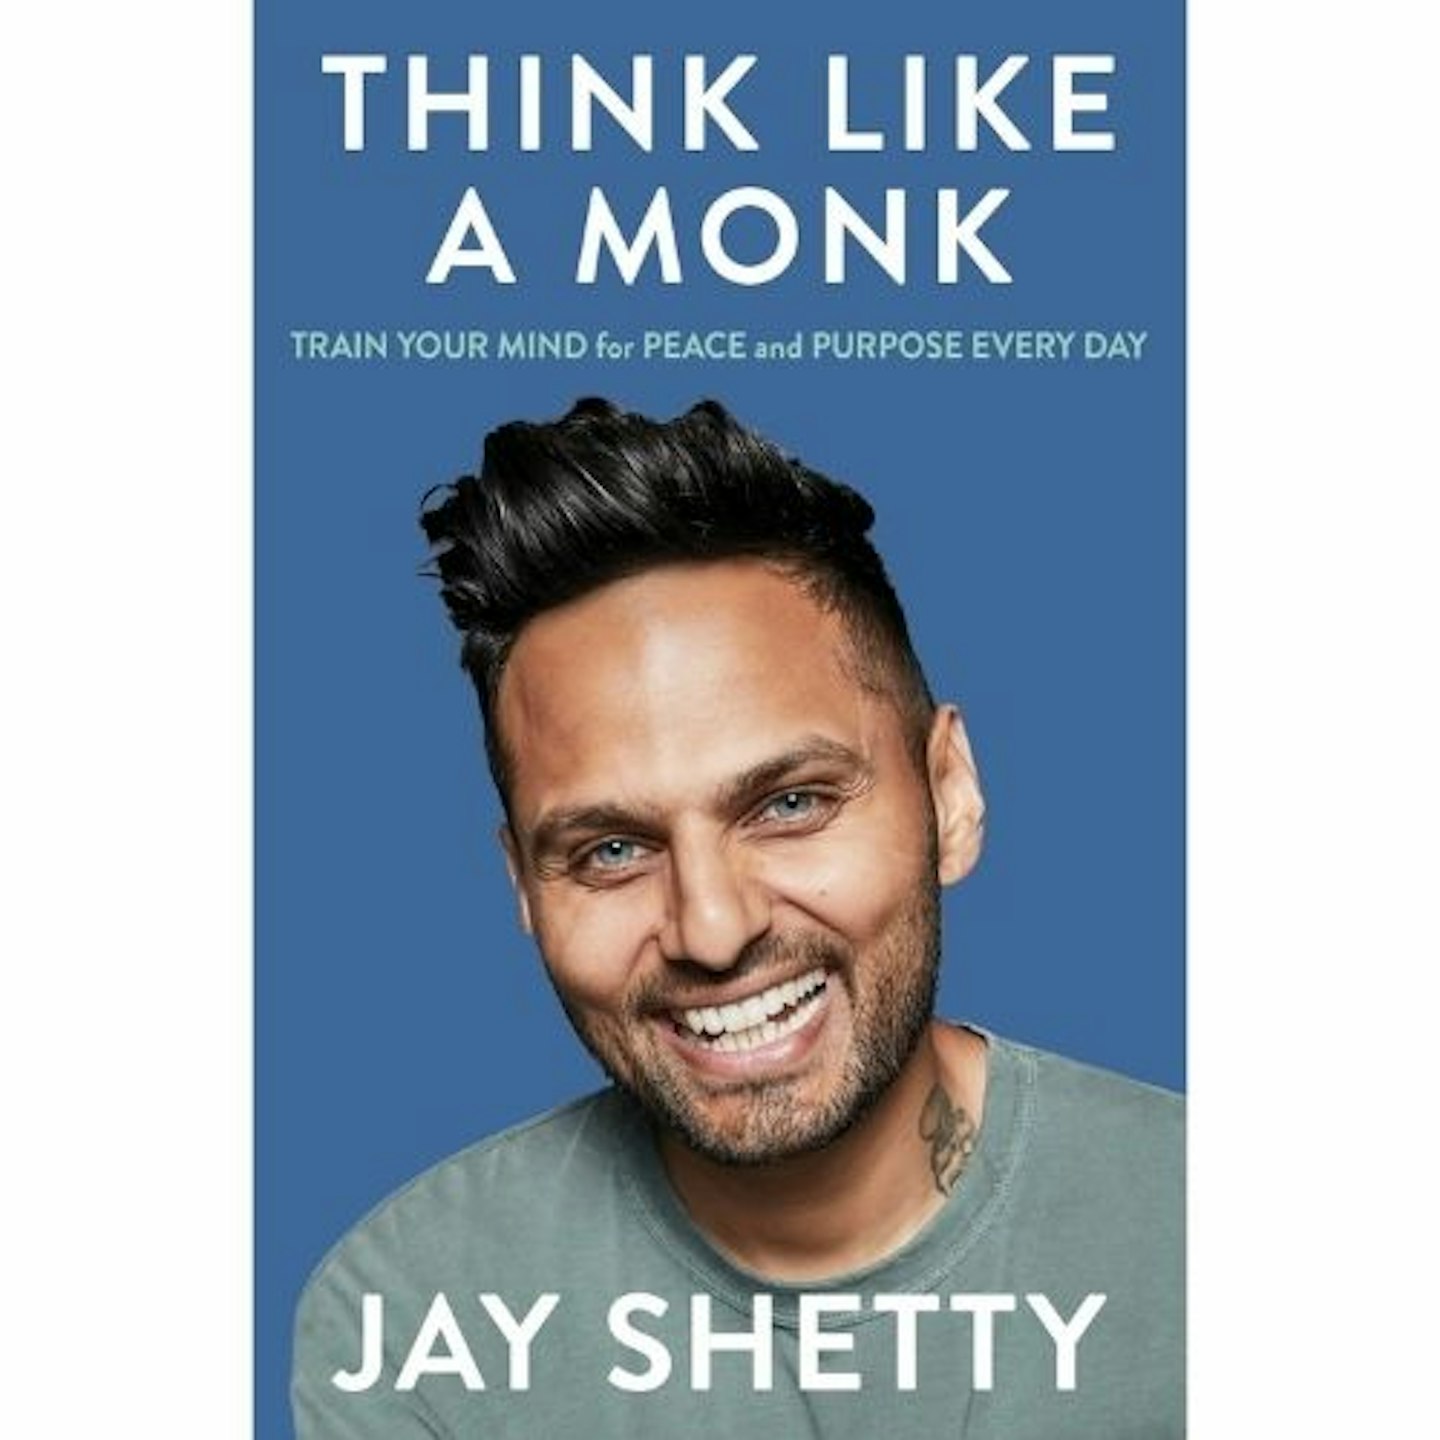 best wellbeing books - Think Like a Monk: The secret of how to harness the power of positivity and be happy now